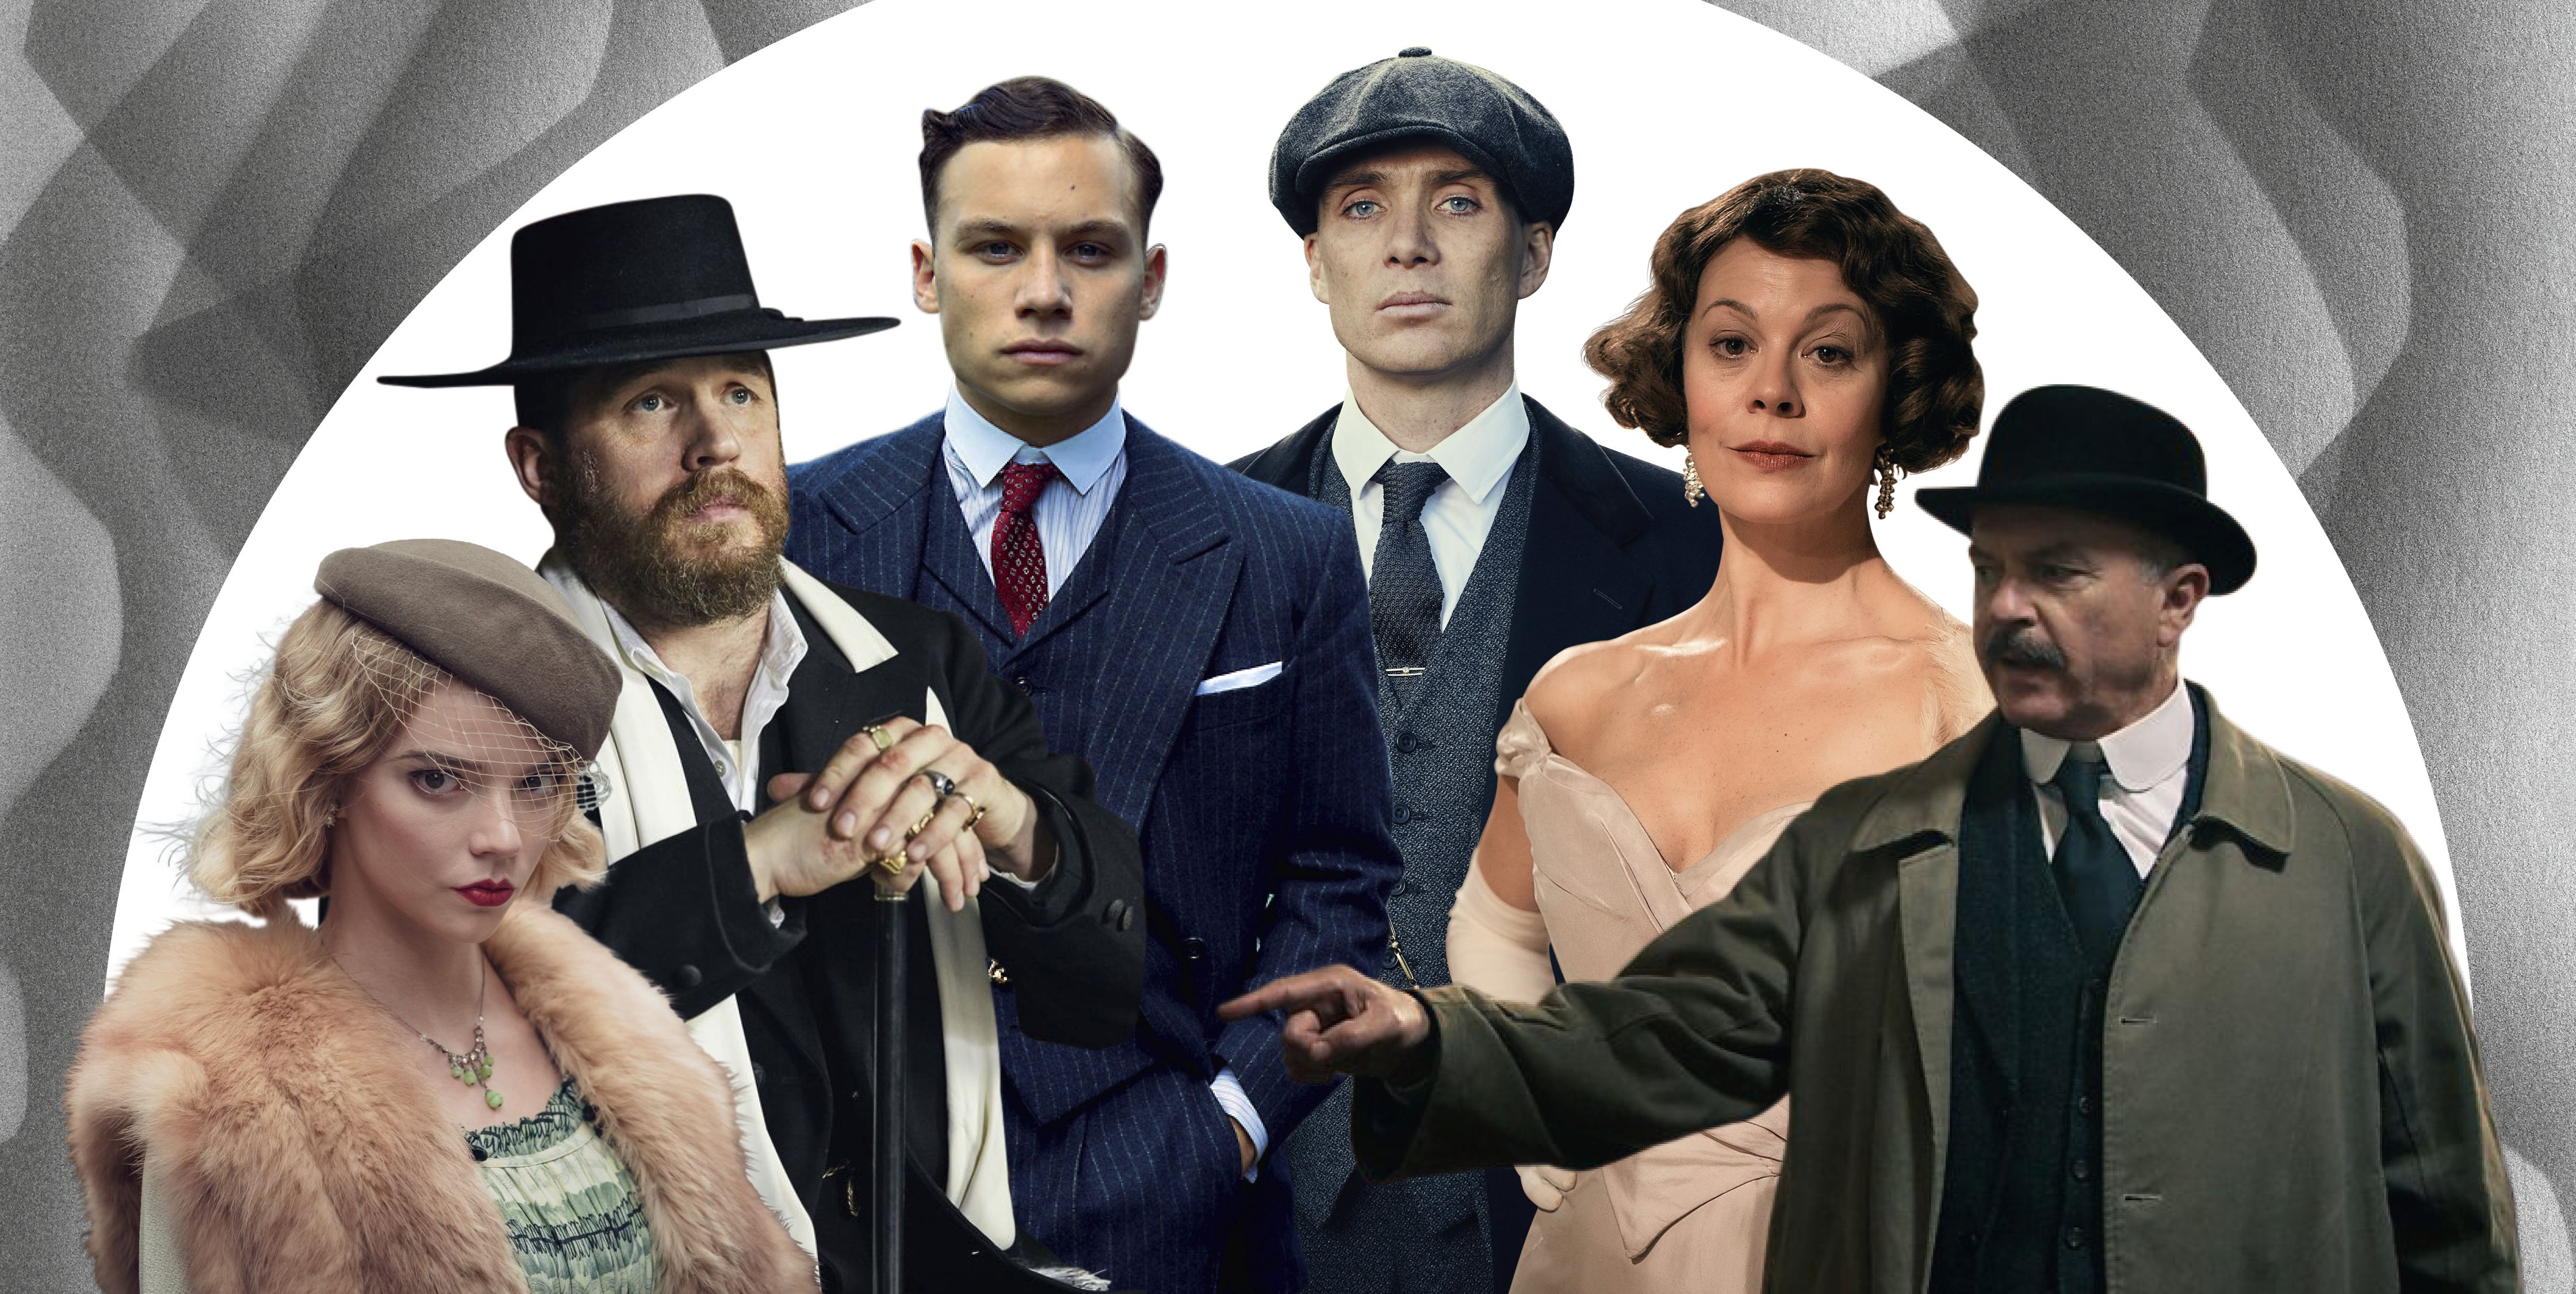 An Oral History of Peaky Blinders, As Told By Cillian Murphy, the Cast and Crew